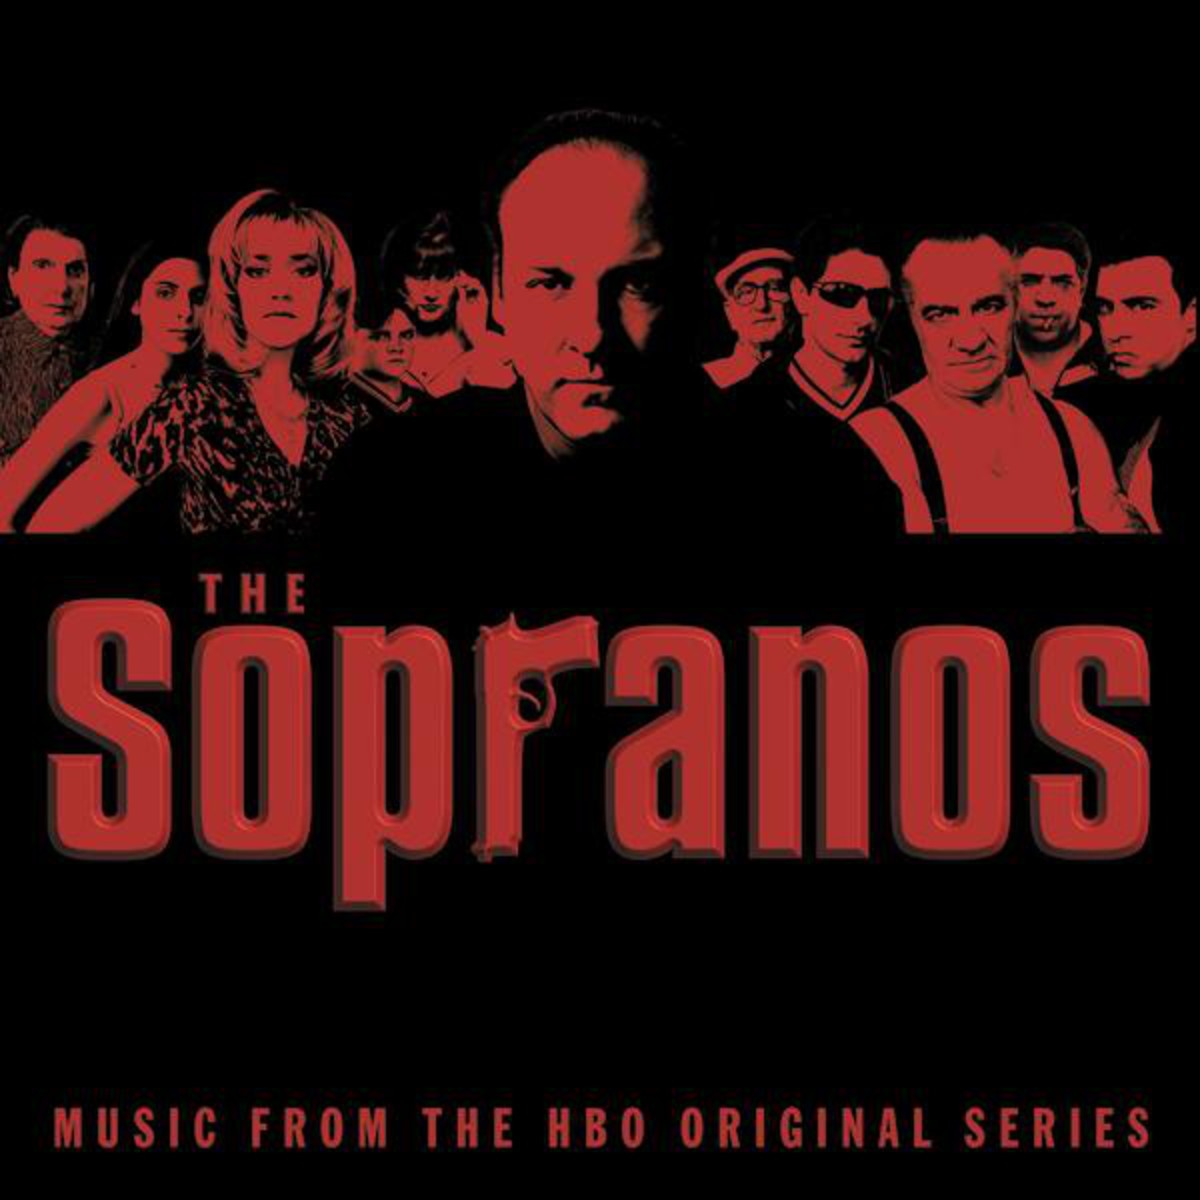 The Sopranos (Music from The HBO Original Series)